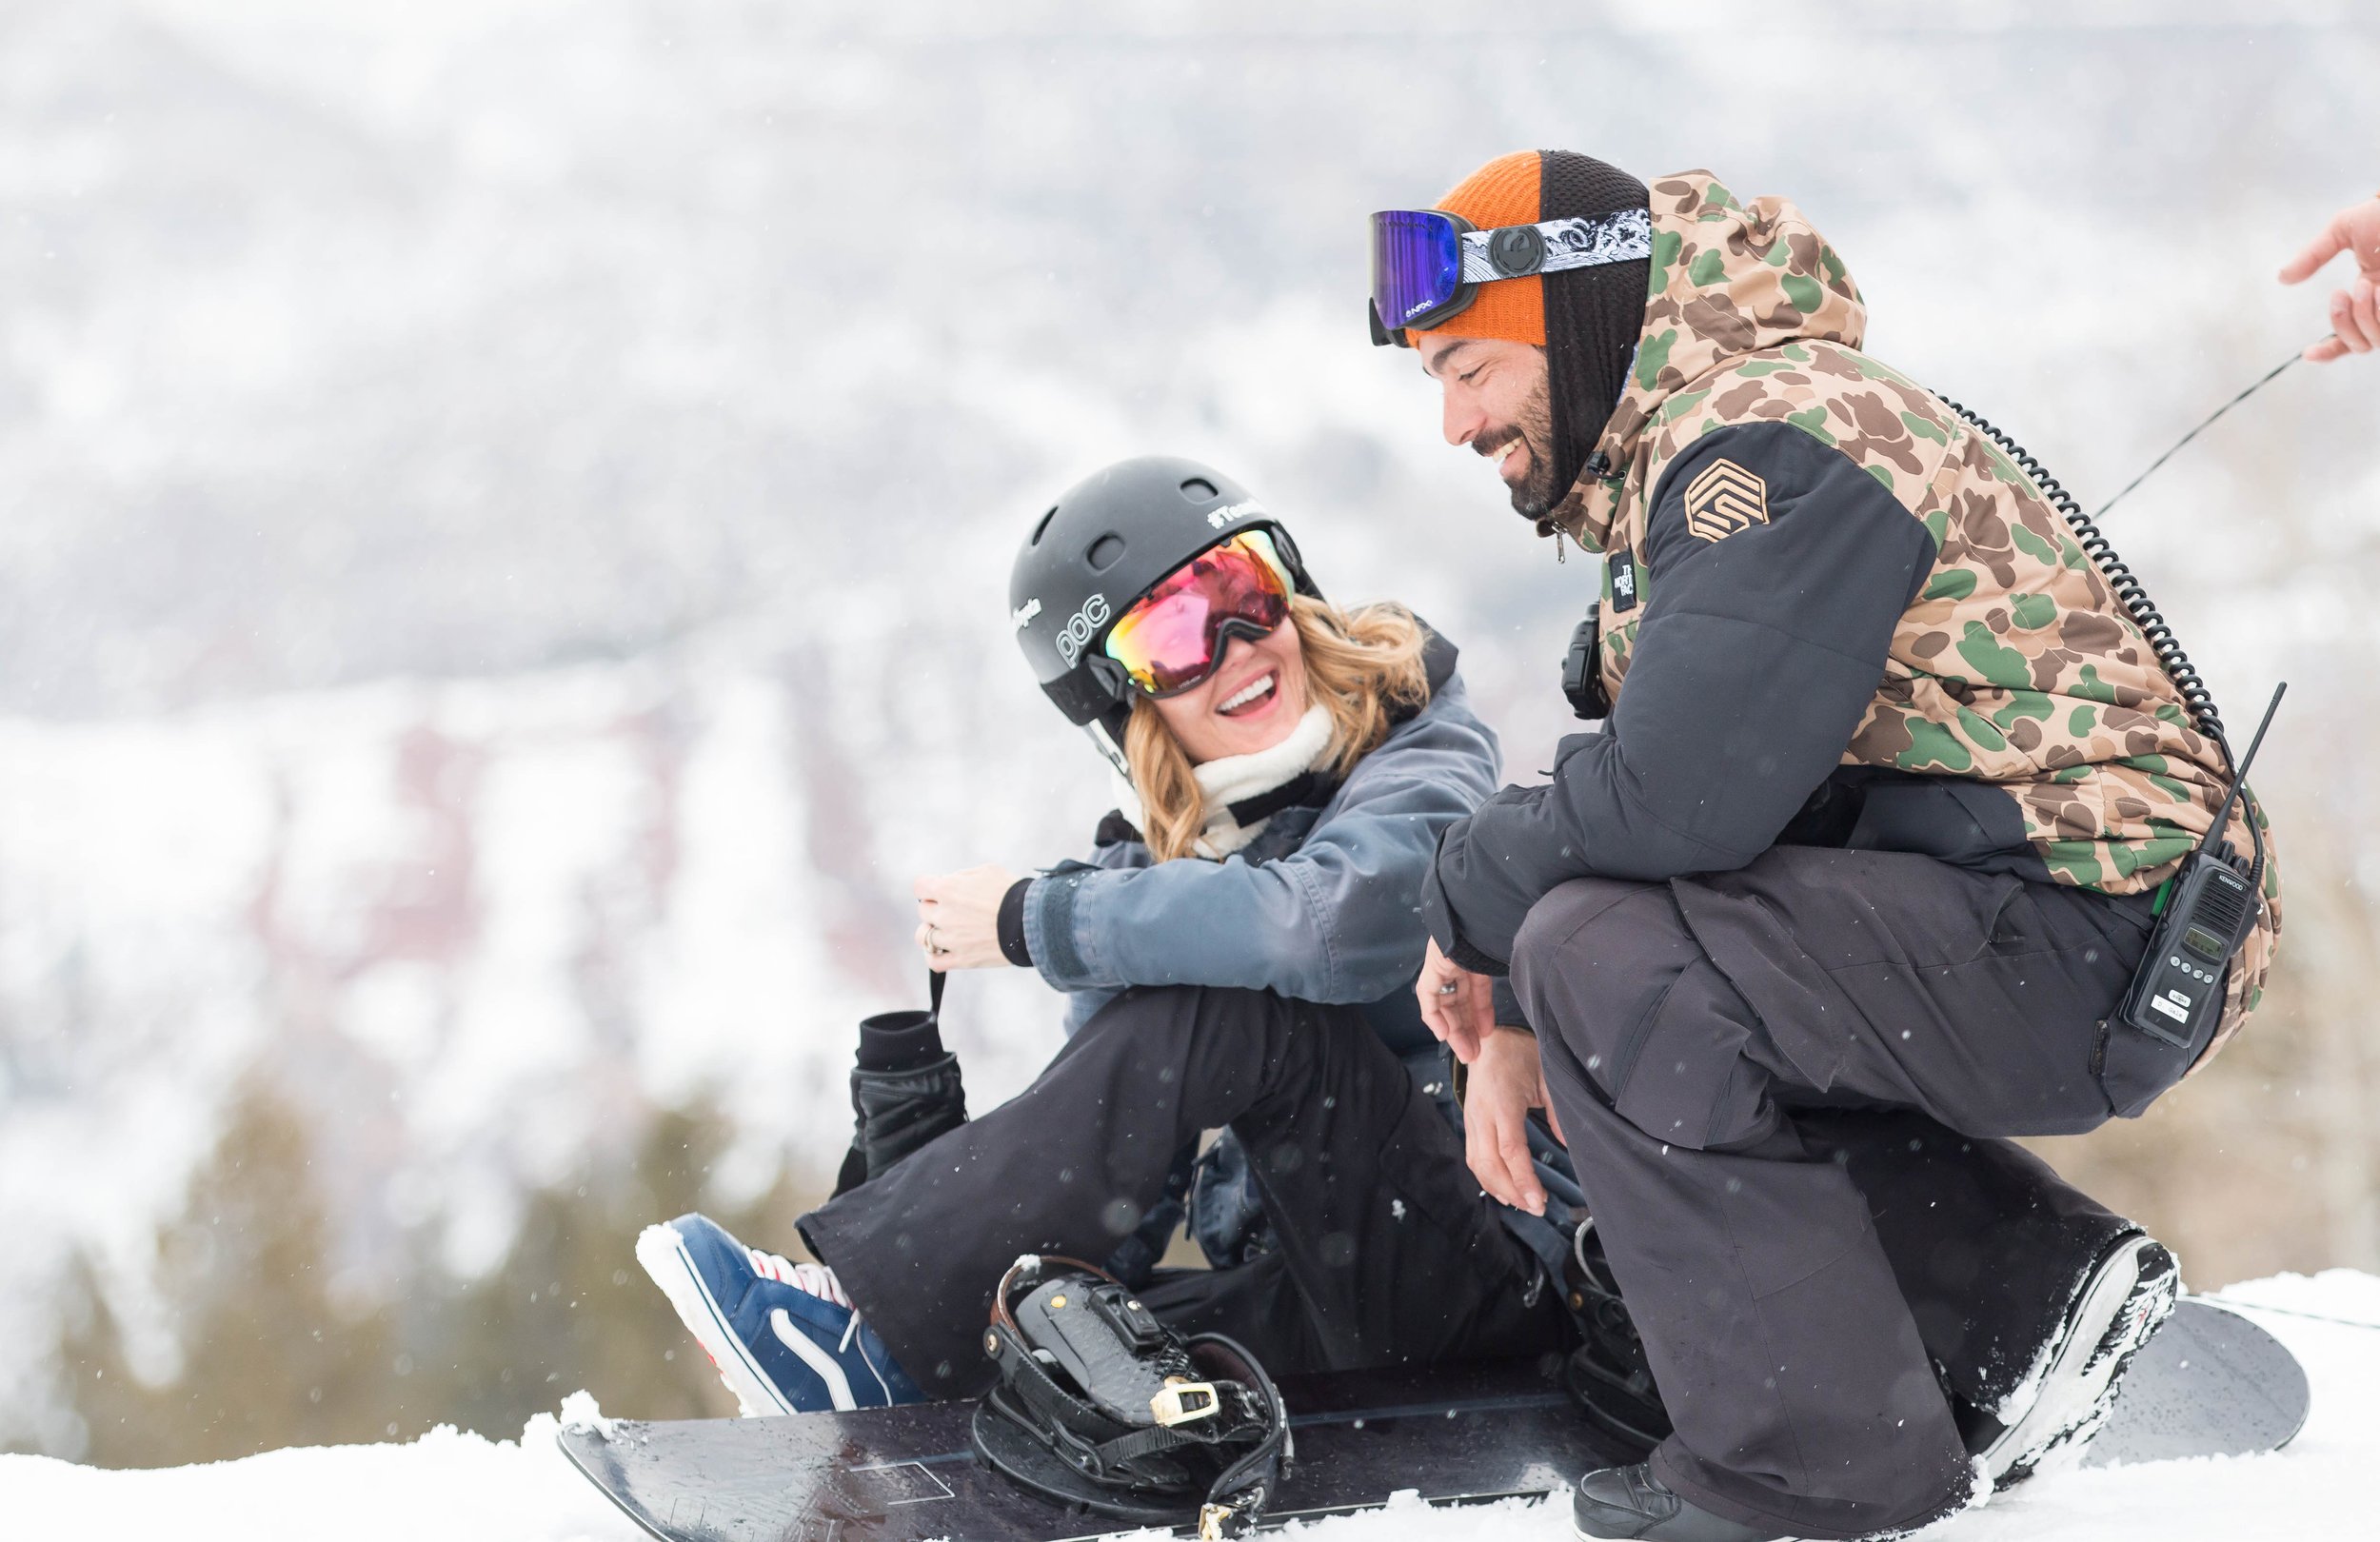 Amy Purdy and Daniel Gale, Founders of Adaptive Action Sports